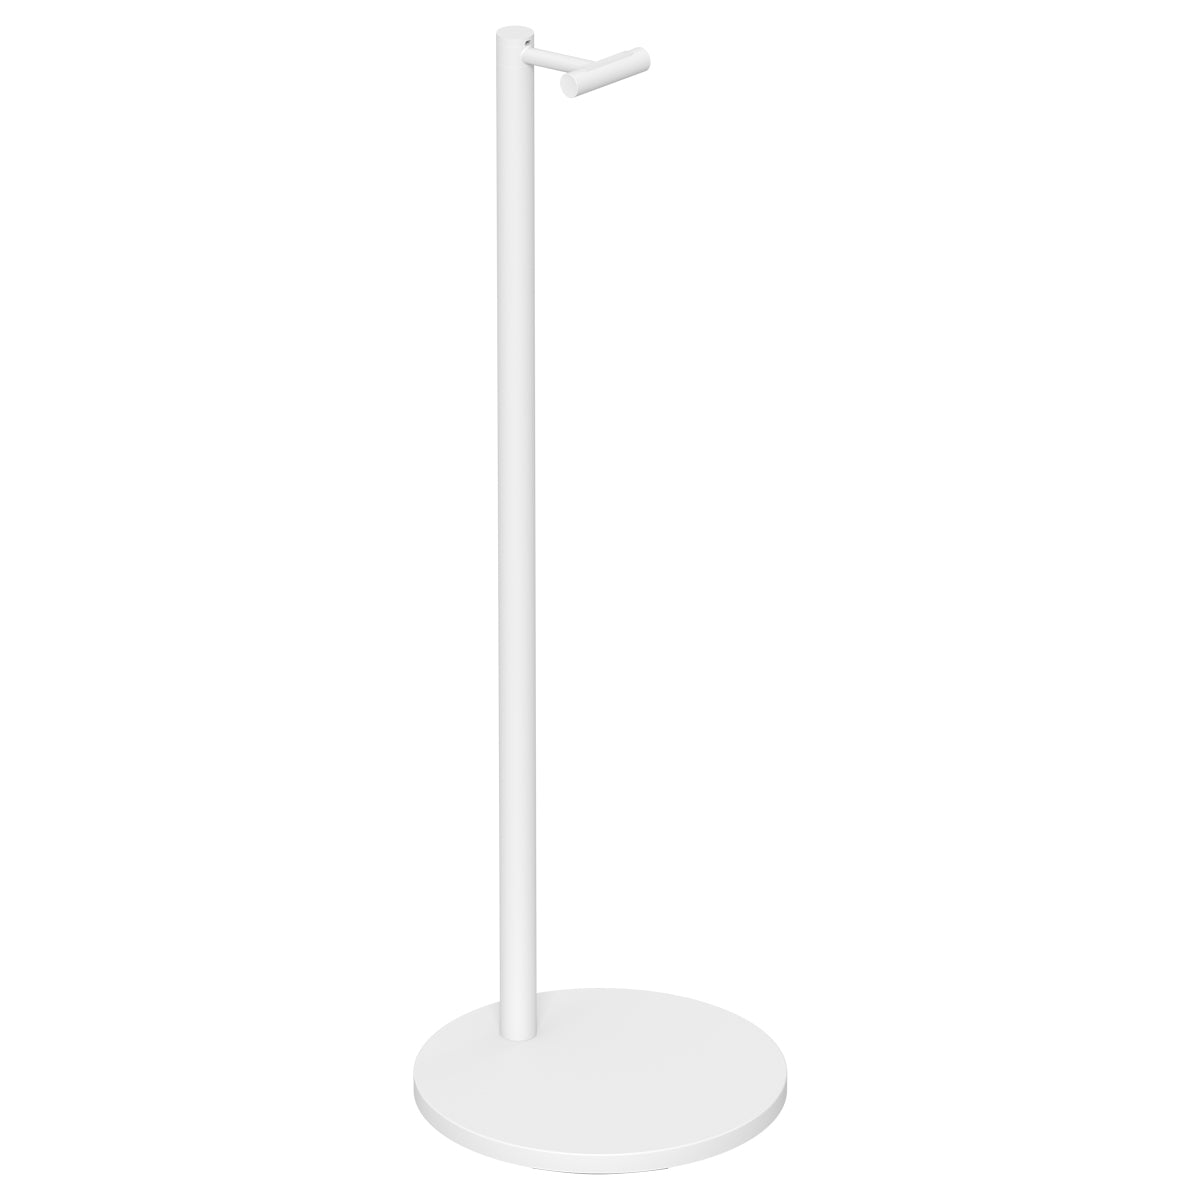 Sonos STAND for ERA 300 - White - The Audio Experts